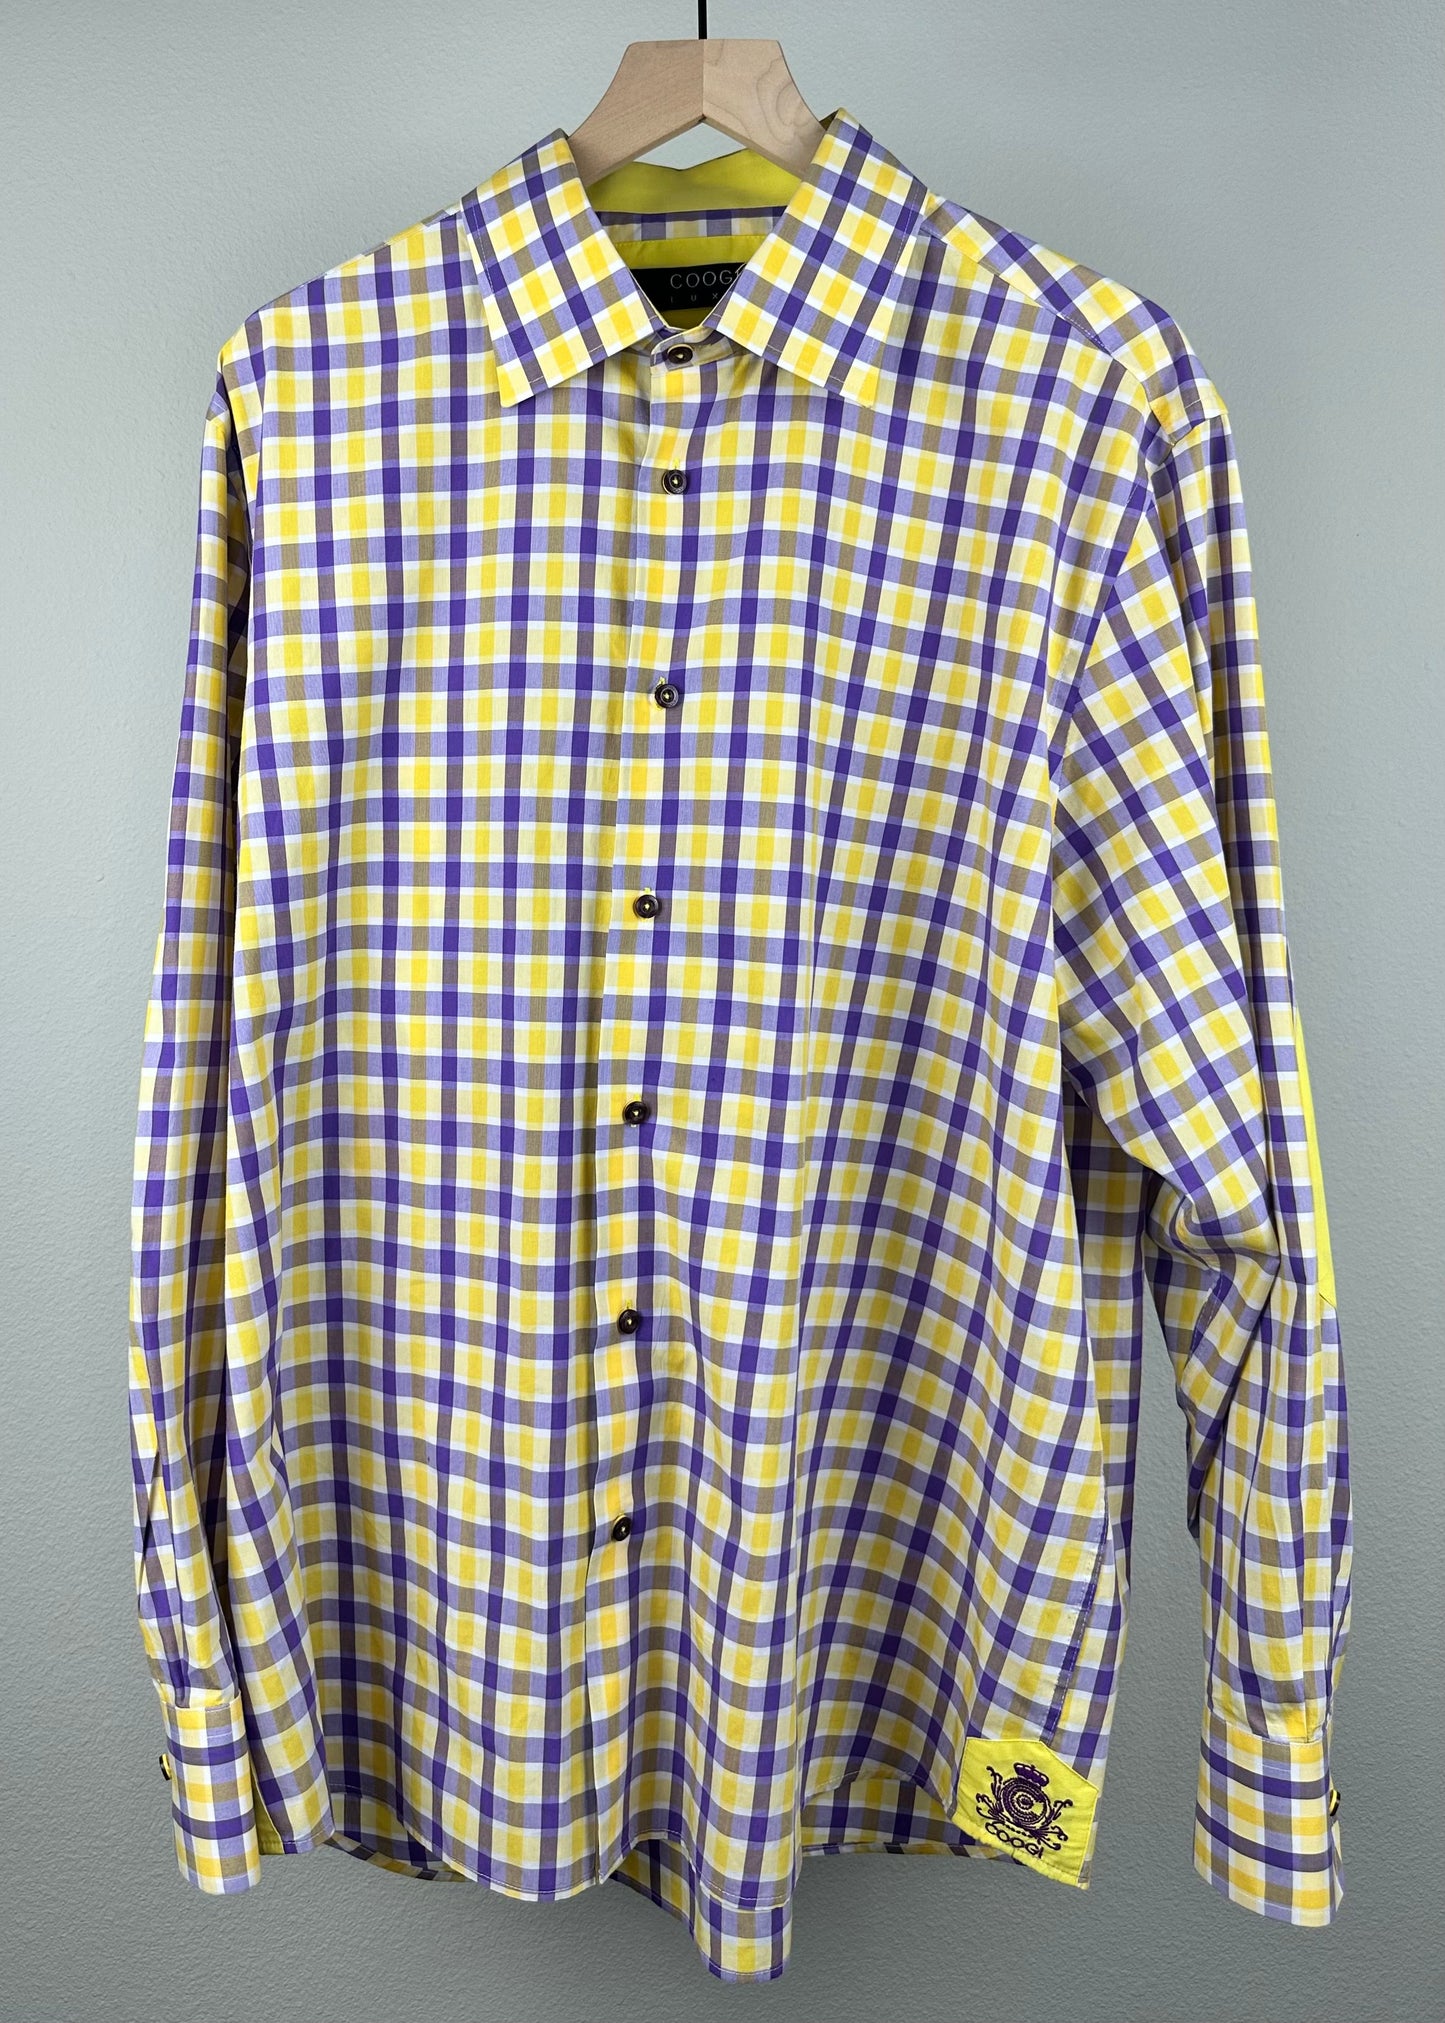 Purple and Gold Coogi Luxe Button Up